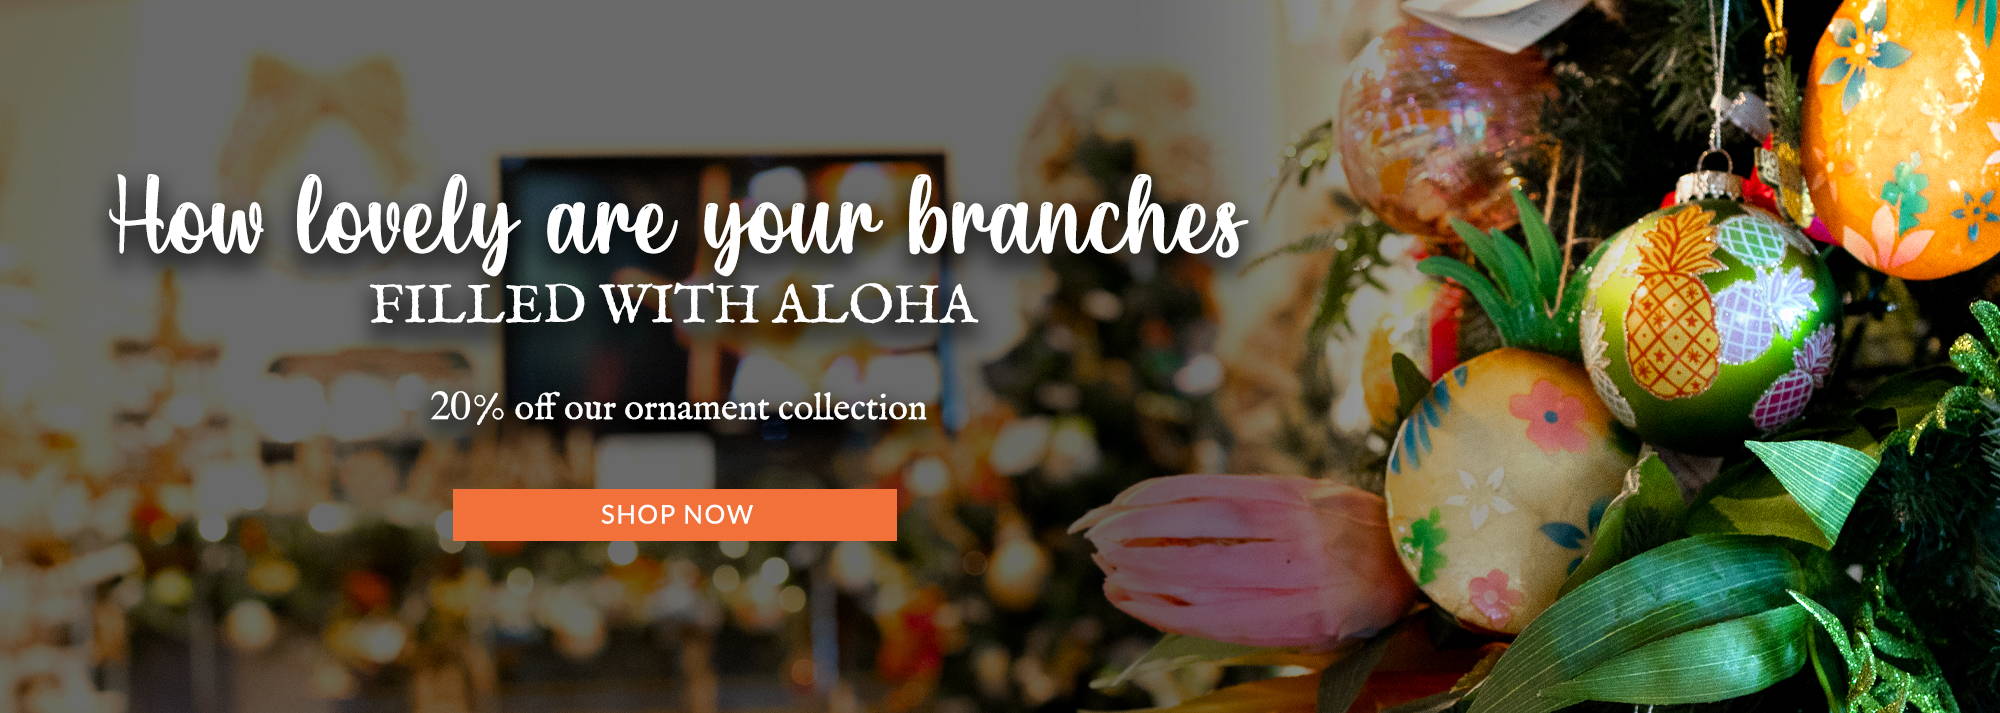 Fill your Christmas tree branches with aloha this year. Get 20% off our island-inspired Christmas Ornaments. Shop our metal, wood and glass Hawaiian Ornaments.